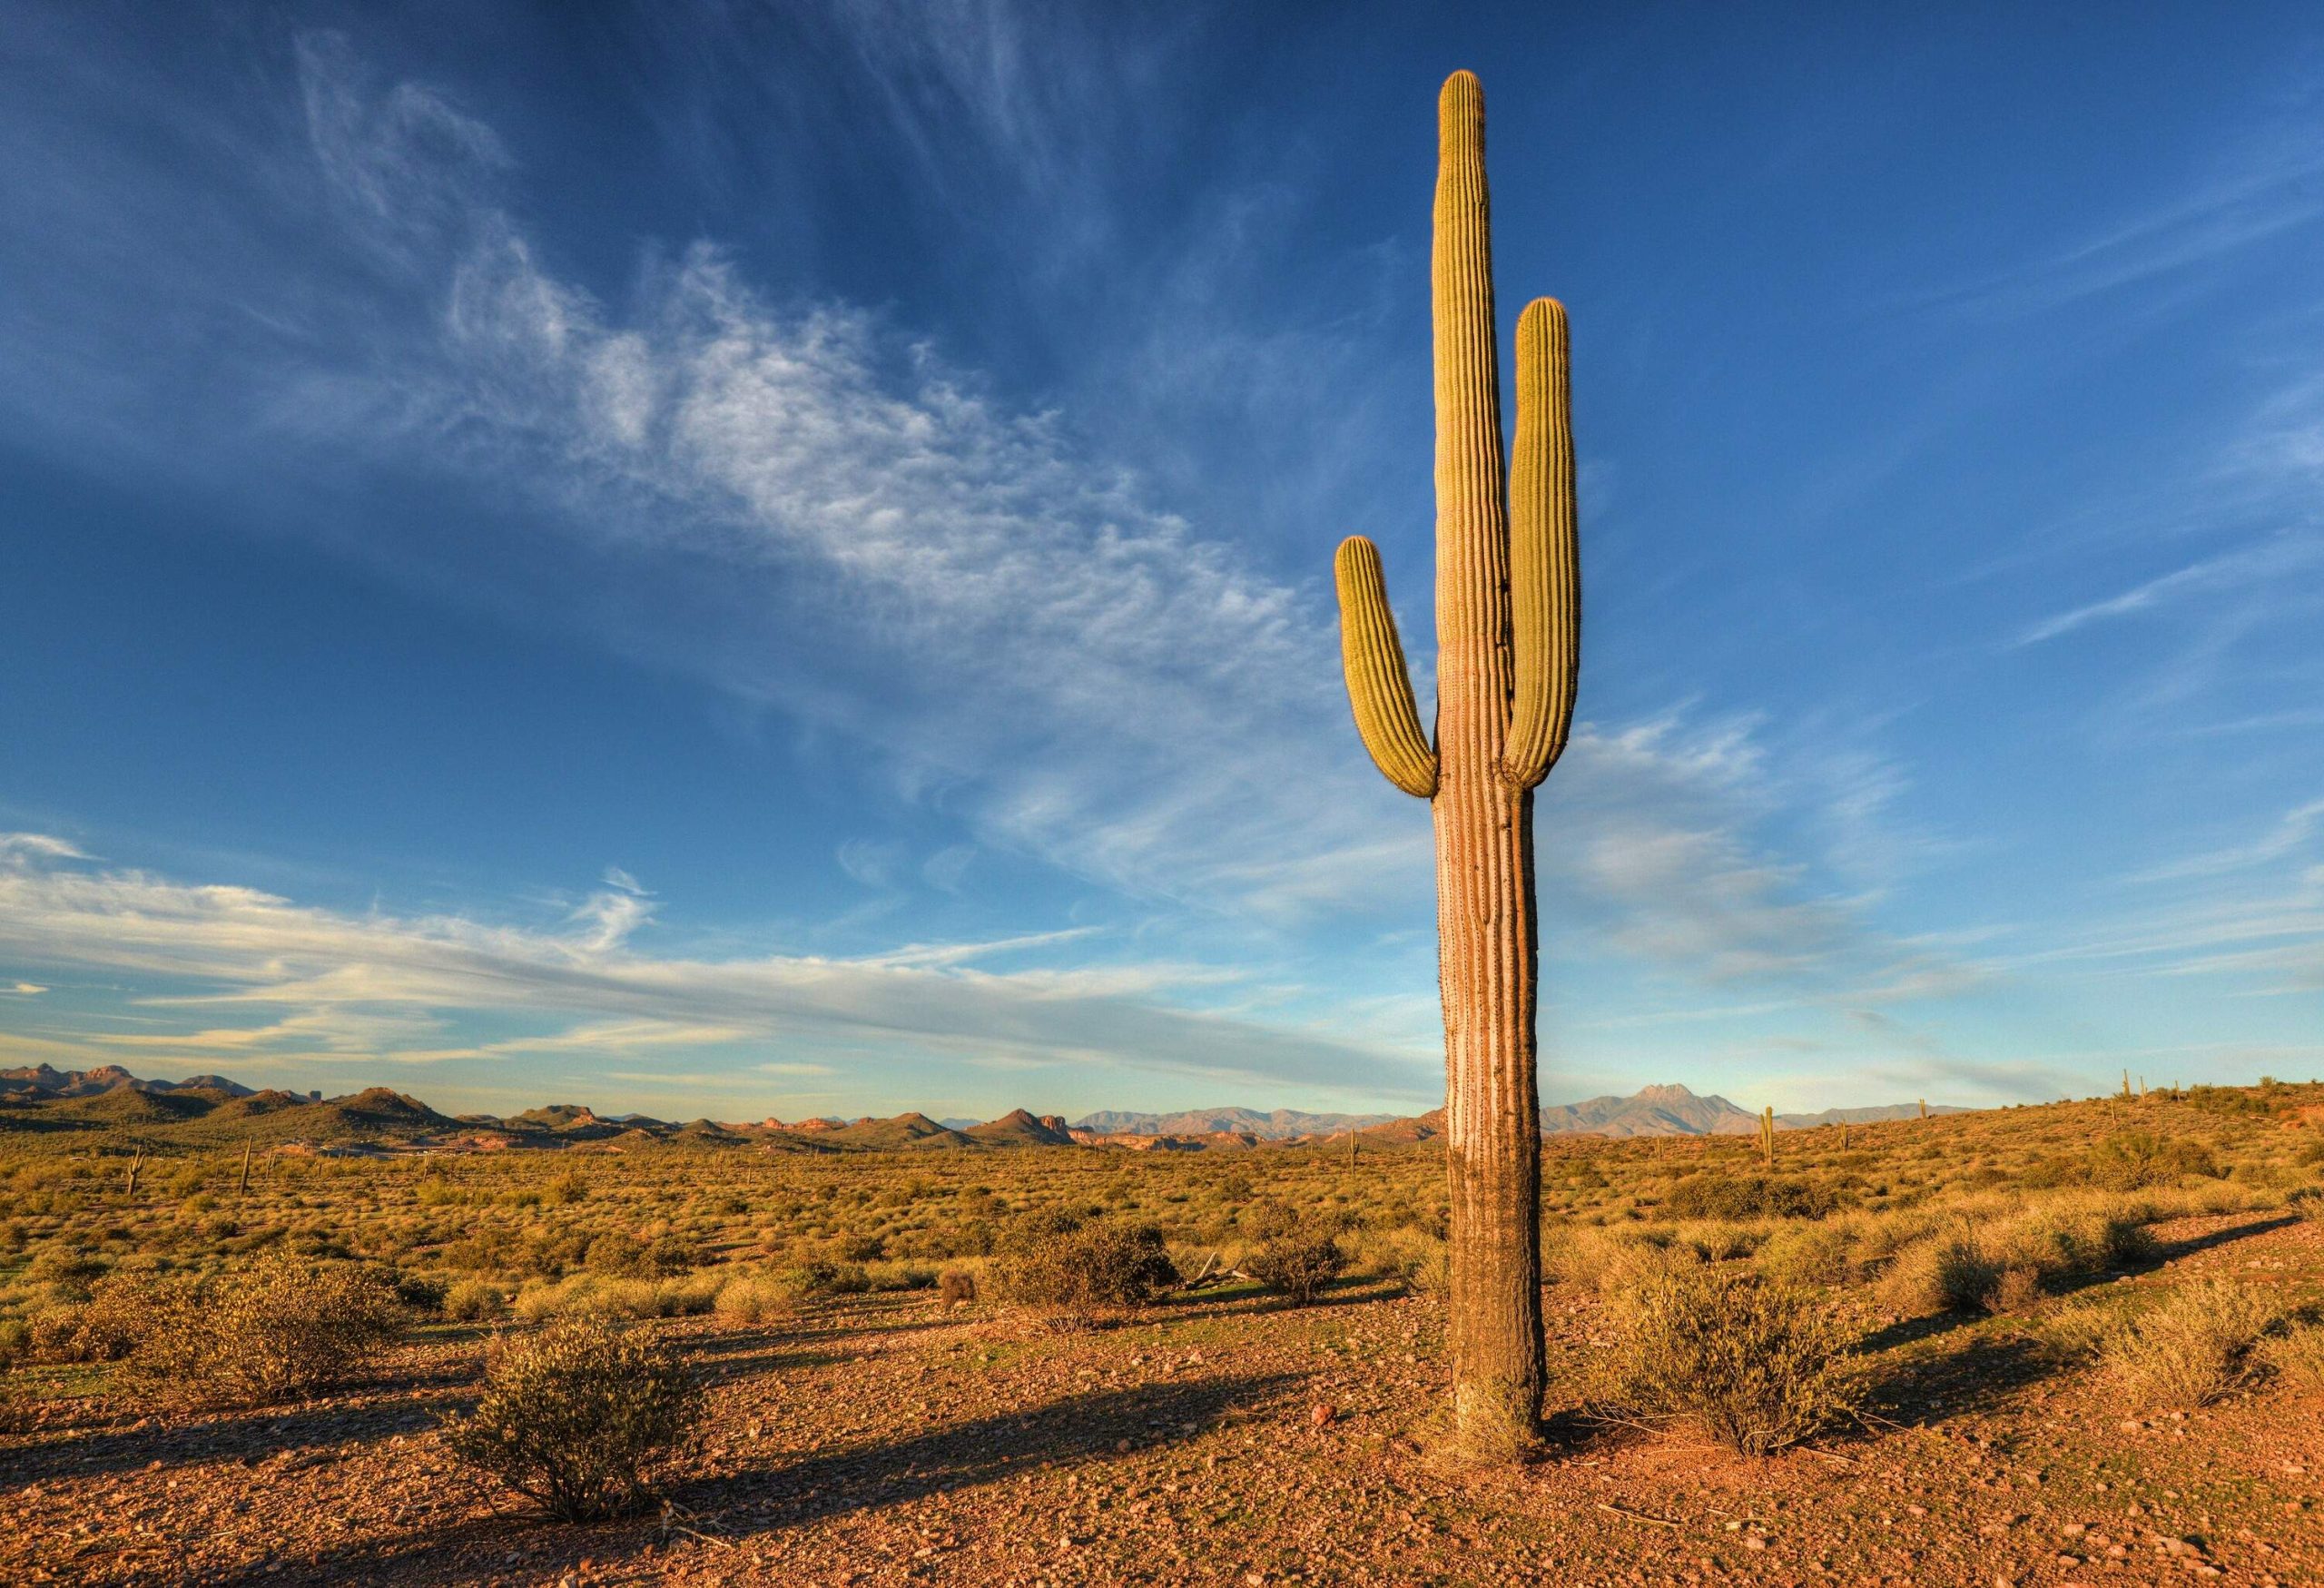 A cactus plant standing alone amid a huge desert landscape of dried grass.